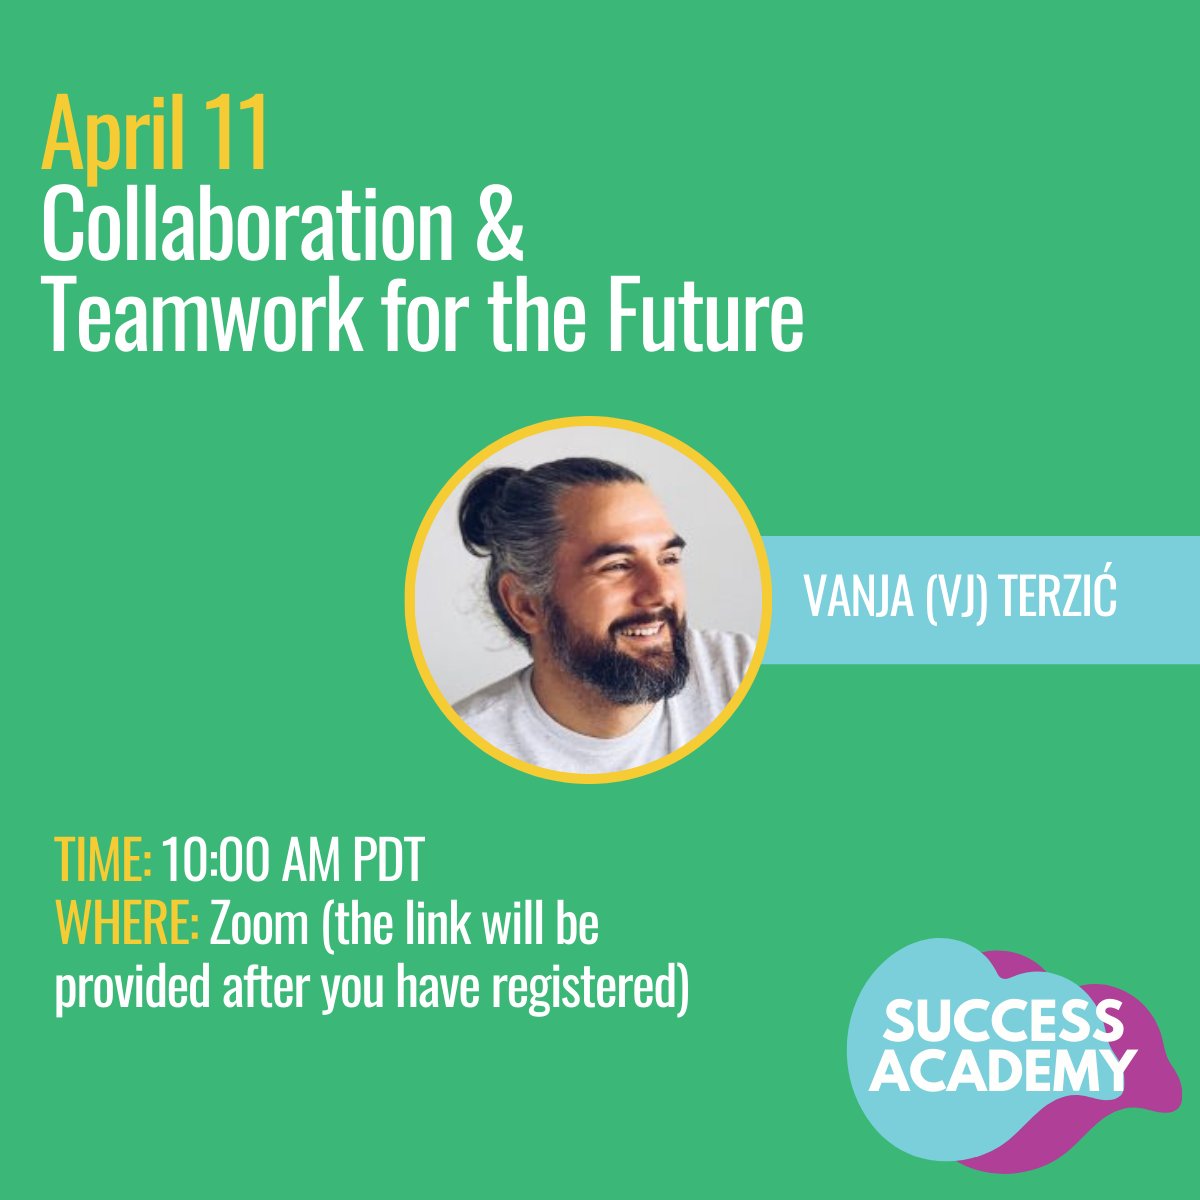 It’s not too late to sign up for today’s virtual workshop and coaching session! Why not start your day doing something to help you in unlocking your full potential? Sign up for our Collaboration & Teamwork for the Future session✨ loisuccessacademy.org/events/